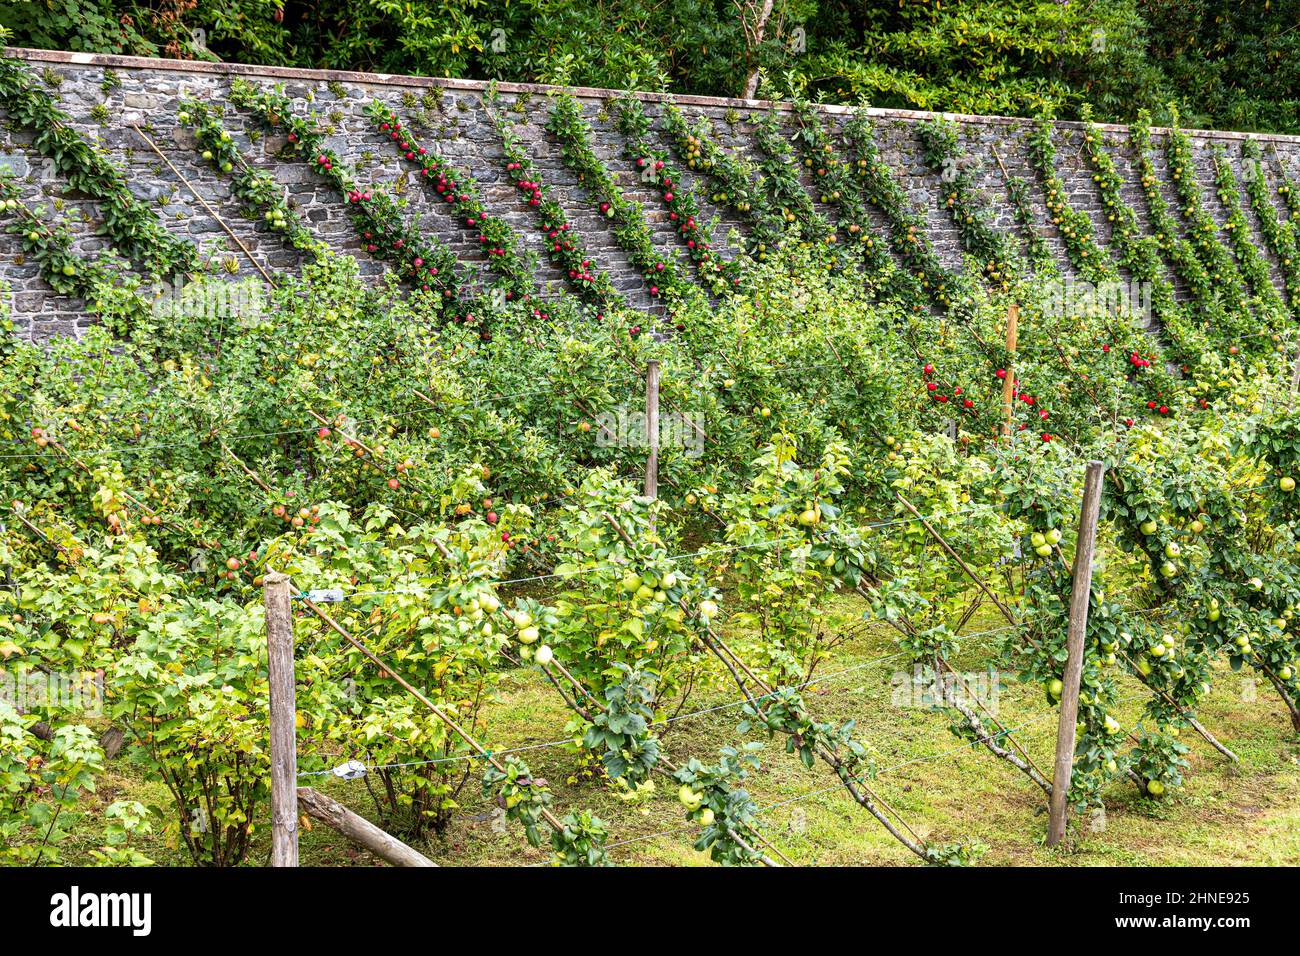 Cordon apples ripening in the walled garden at the Torrisdale Castle Estate on the Kintyre Peninsula, Argyll & Bute, Scotland UK Stock Photo